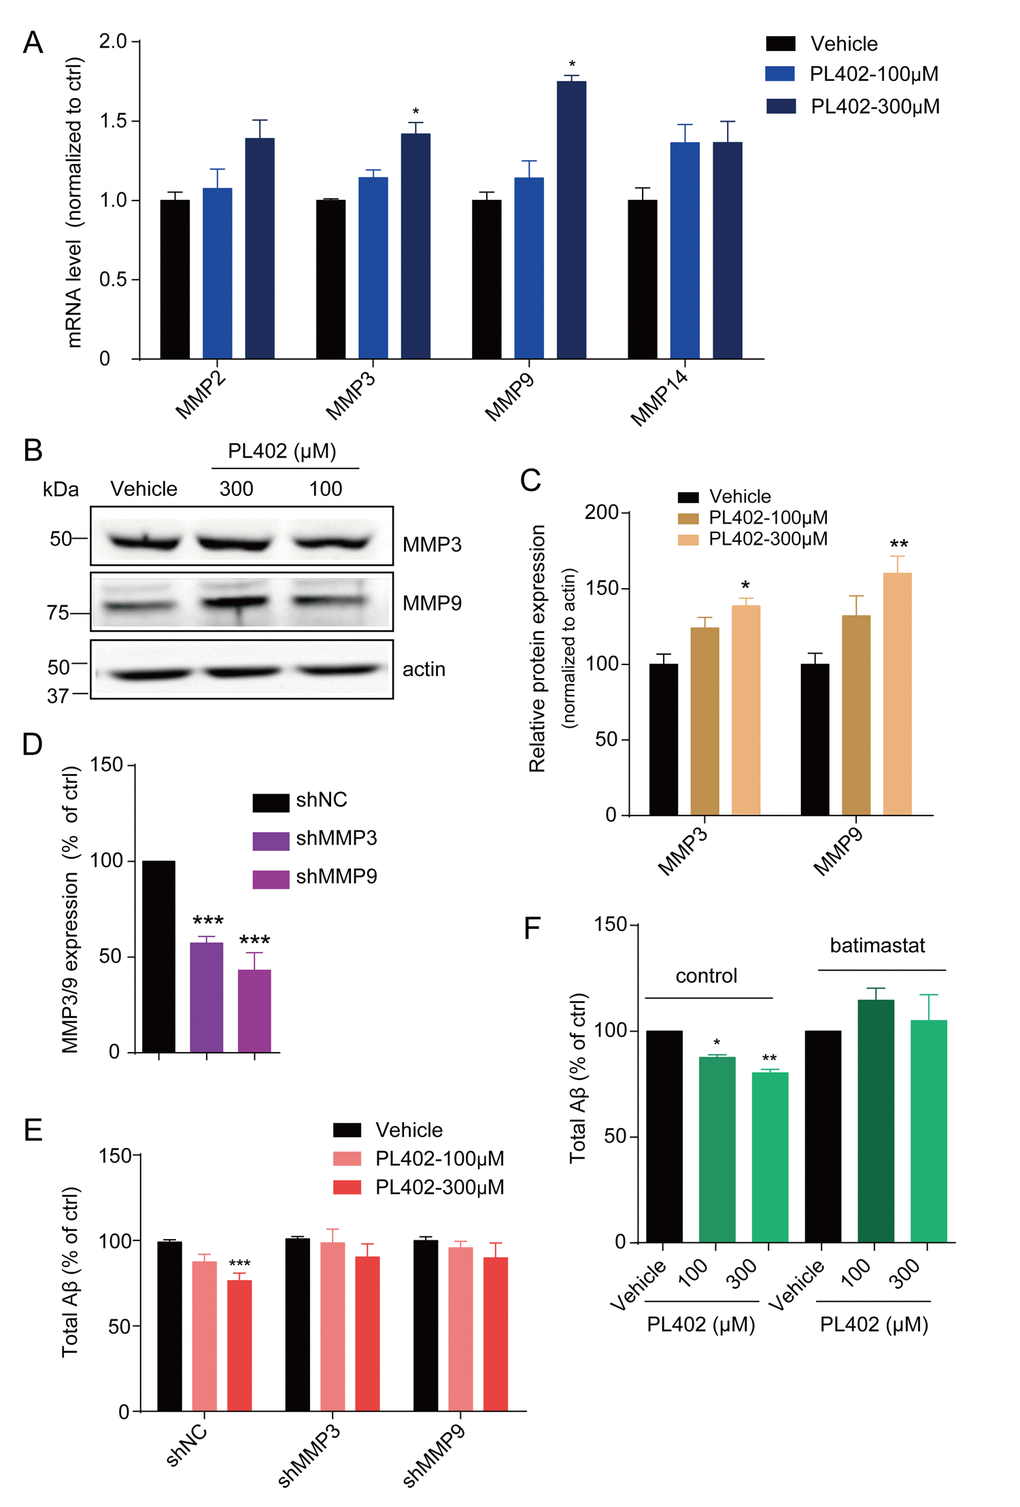 PL402 promotes the expression of MMP3 and MMP9 which are involved in the effect of PL402 on Aβ level modulation. (A) The mRNA level of Aβ degradation enzymes (MMPs) in SK-N-SH cells treated by vehicle (0.1% DMSO) or PL402 at 100μM and 300μM for 24h. N=4. (B–C) Representative image of a western blot showing the expression of MMP3 and MMP9 in SK-N-SH cells after treatment with vehicle (0.1% DMSO), or PL402 at 100μM and 300μM for 24h. Actin was used as a loading control (B). (C) The quantification analysis of (B) using ImageJ. N=3. (D) The mRNA level of MMP3 and MMP9 in SK-N-SH cells with the infection of scrambled, MMP3 or MMP9 gene-specific shRNA. N=4. (E) The levels of total Aβ produced by SK-N-SH cells measured by ELISA after treatment with vehicle (0.1% DMSO) or PL402 at 100μM and 300μM for 24 h in the cells infected with scrambled, MMP3 or MMP9 gene-specific shRNA. N=4. (F) The total Aβ level in SK-N-SH cells with presence or absence of the PL402 for 24h after pretreatment with vehicle (0.1% DMSO), or 10μM MMP inhibitor (batimastat) for 1h. N=3. Data are presented as the mean ± SEM, n >3 independent experiments. *p